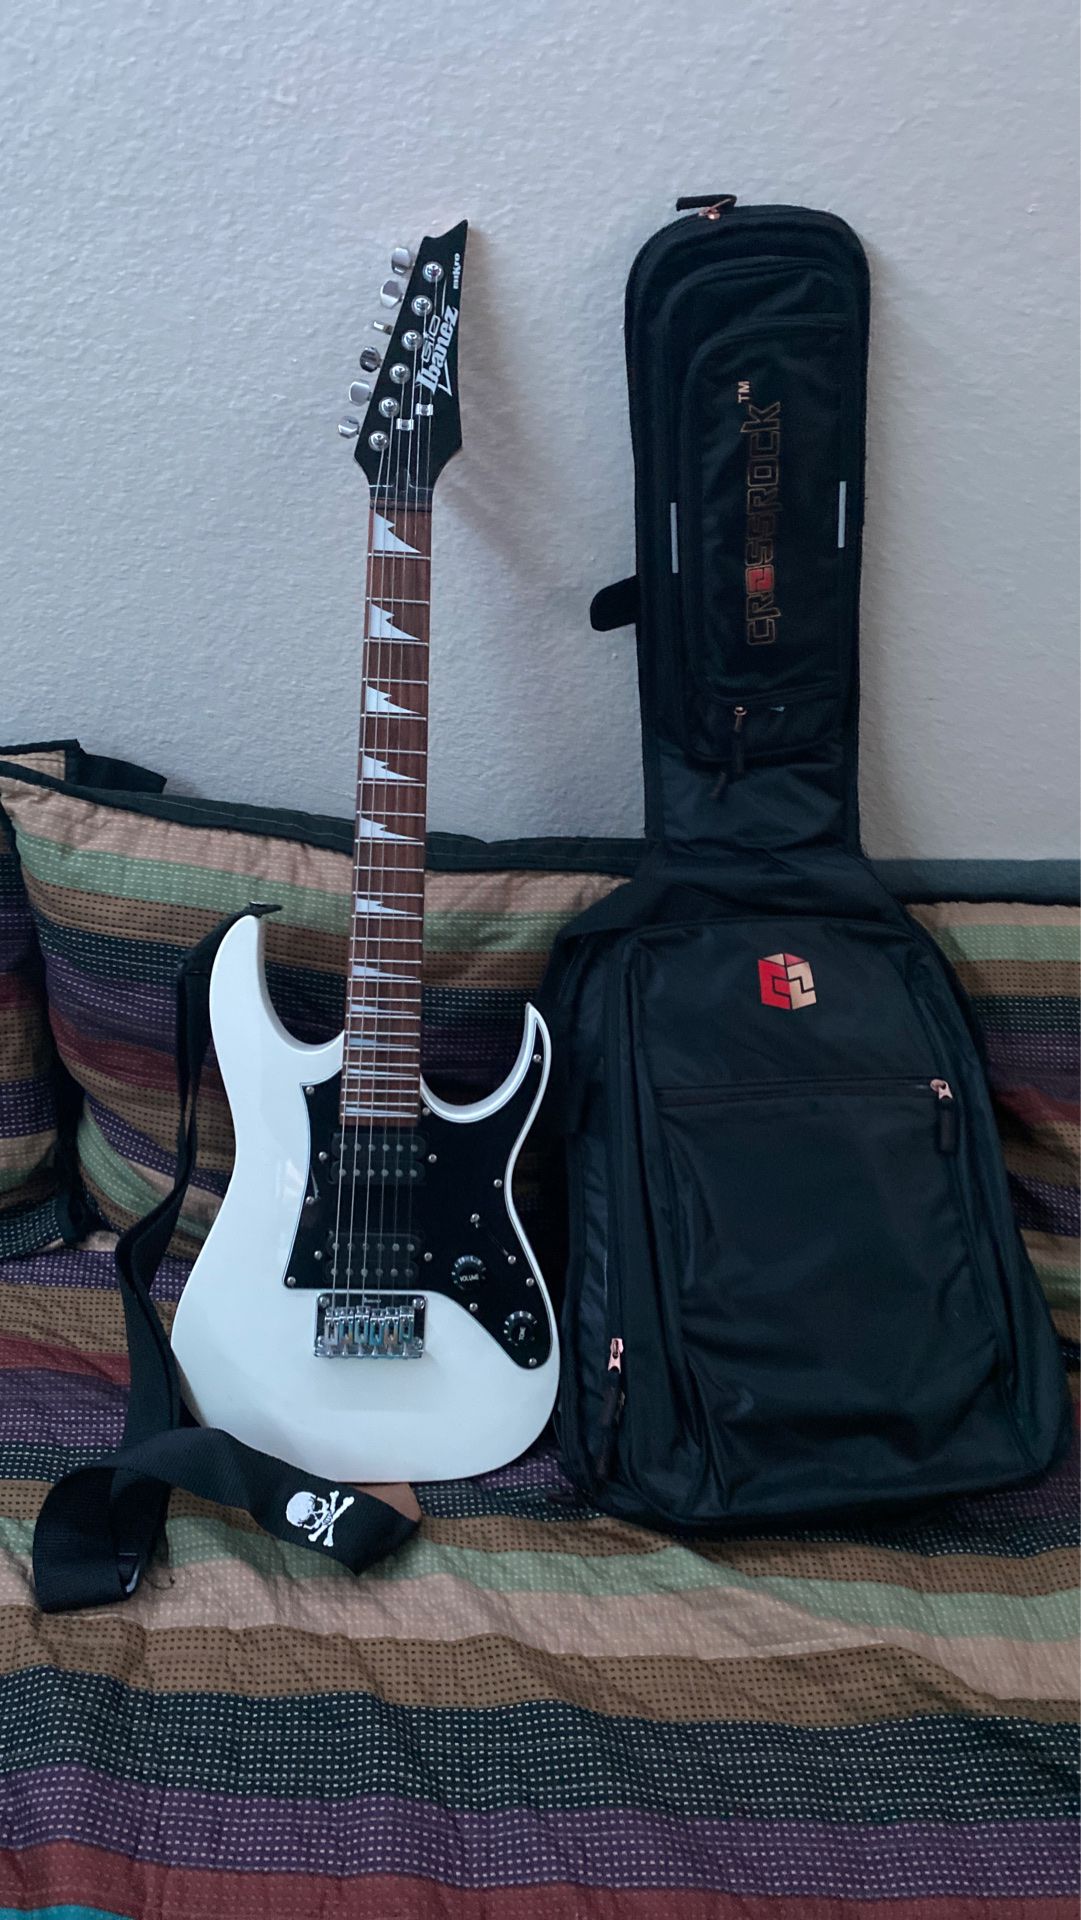 Ibanez mini size guitar with travel backpack strap case and strap